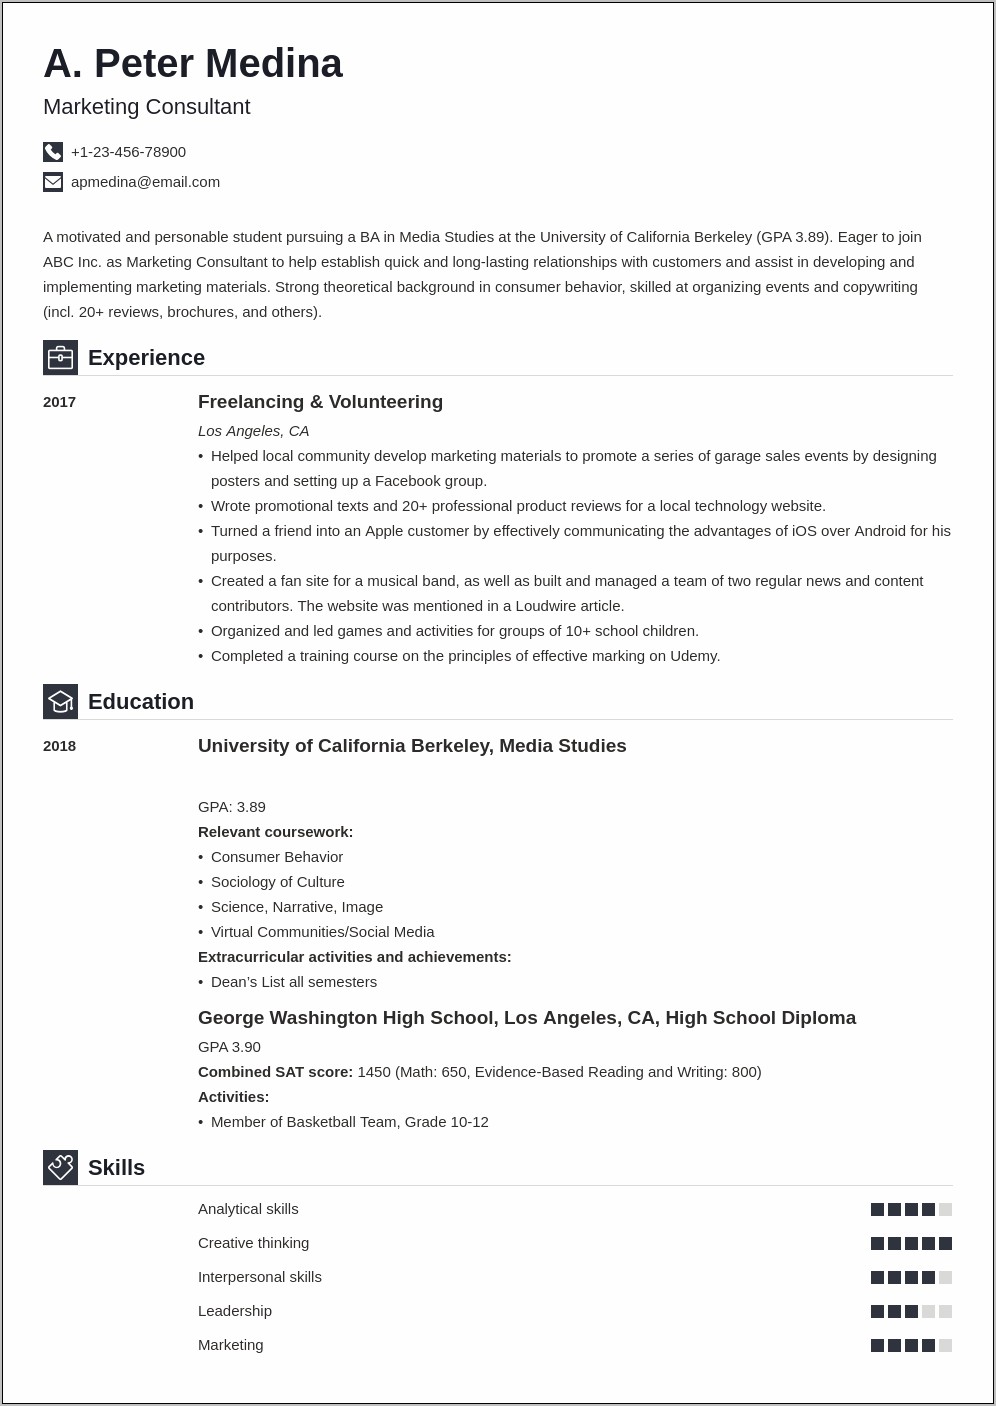 Quick Job Objectives For A Resume Samples